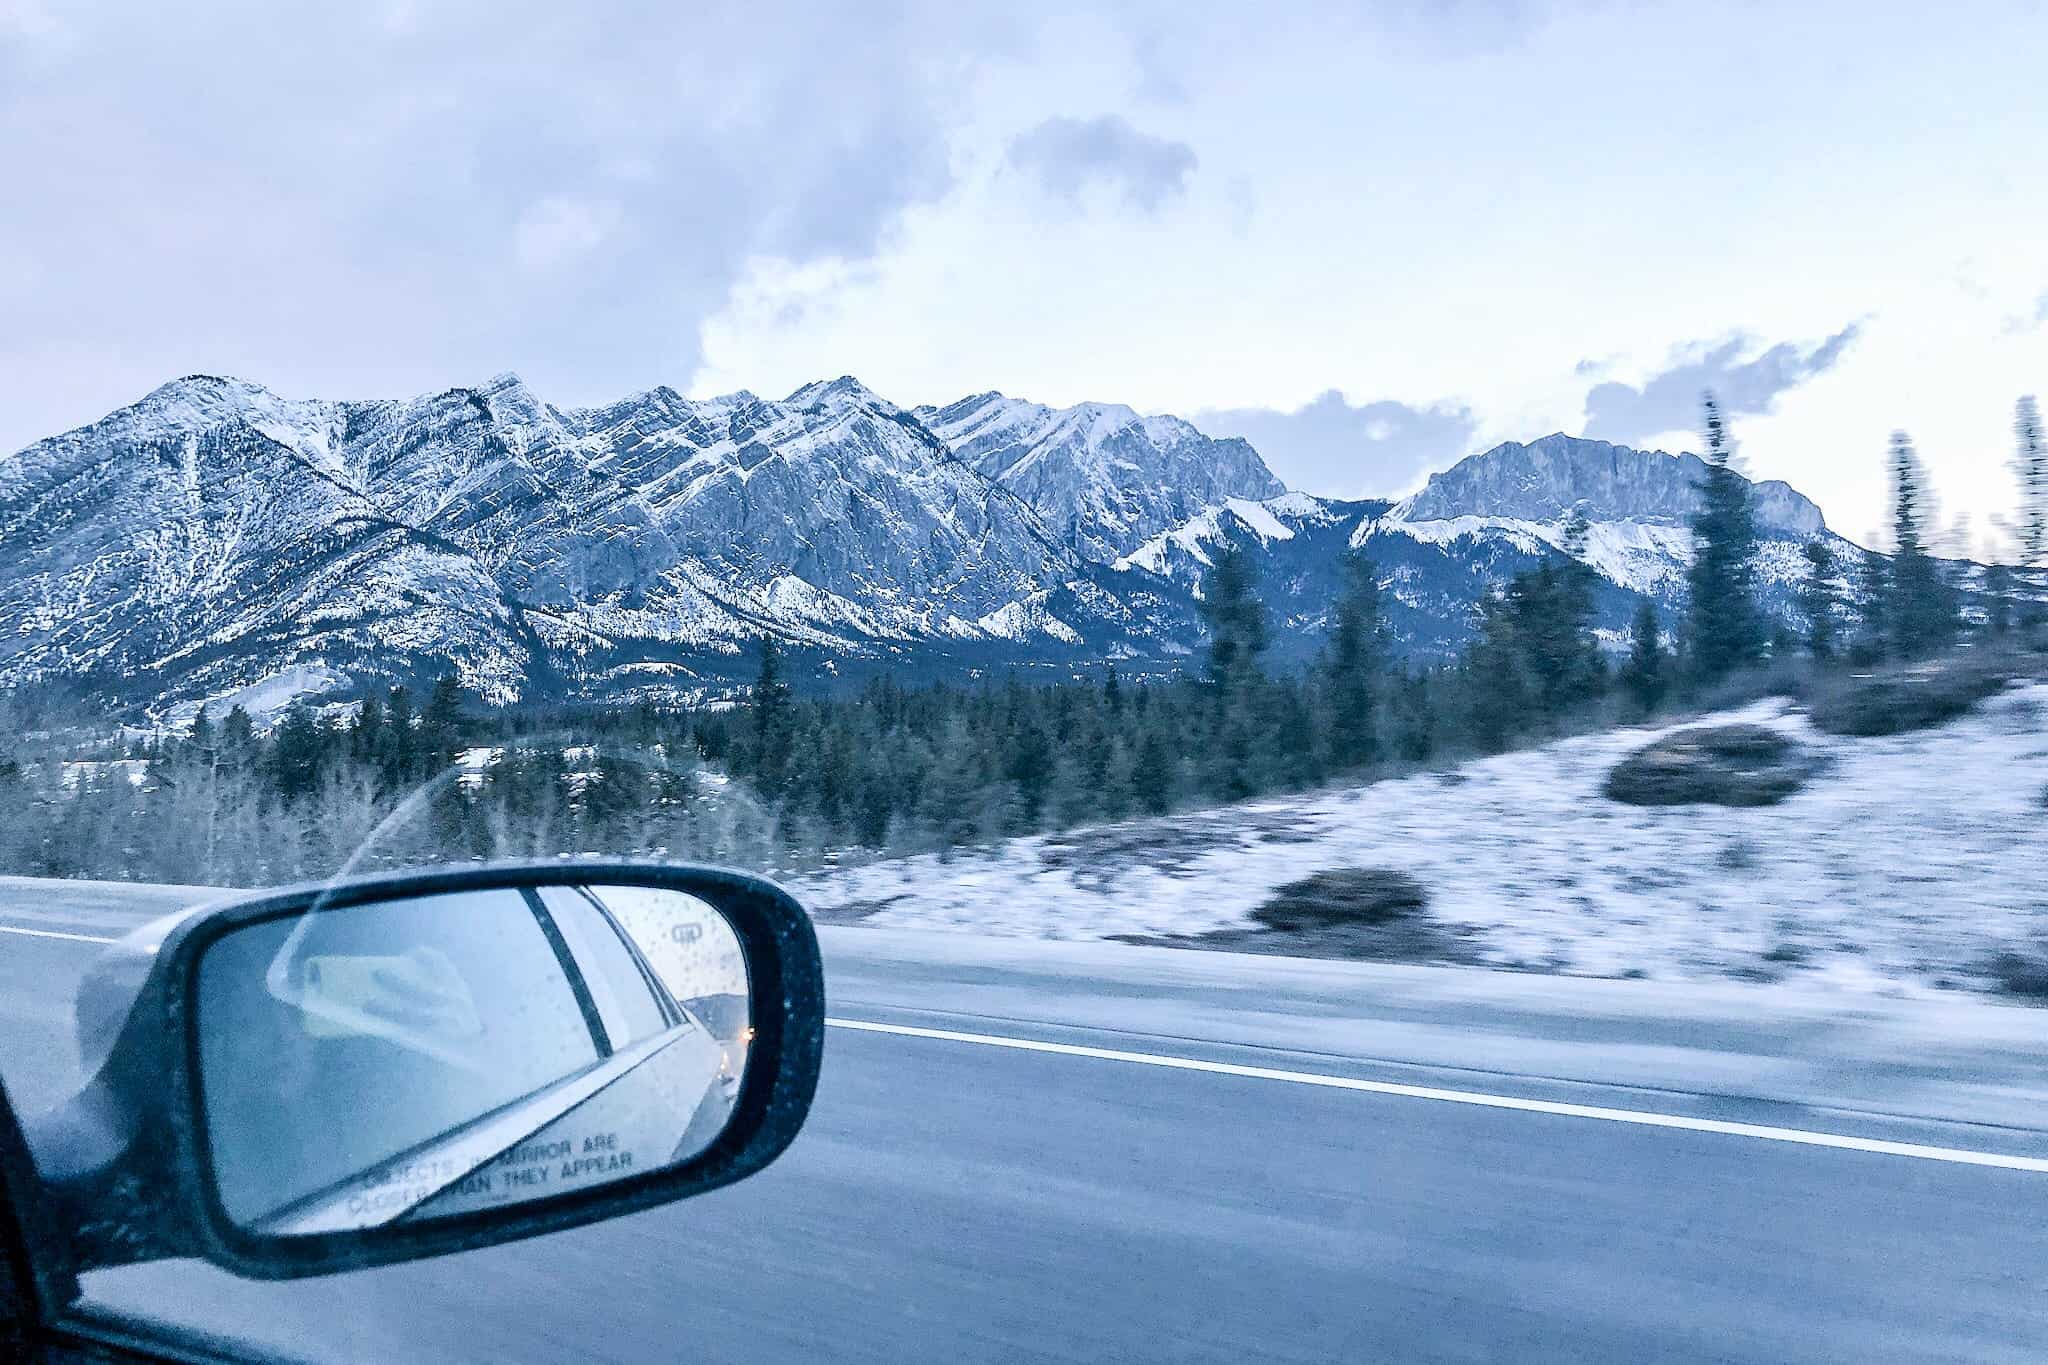 View from the car, driving through Banff National Park in winter